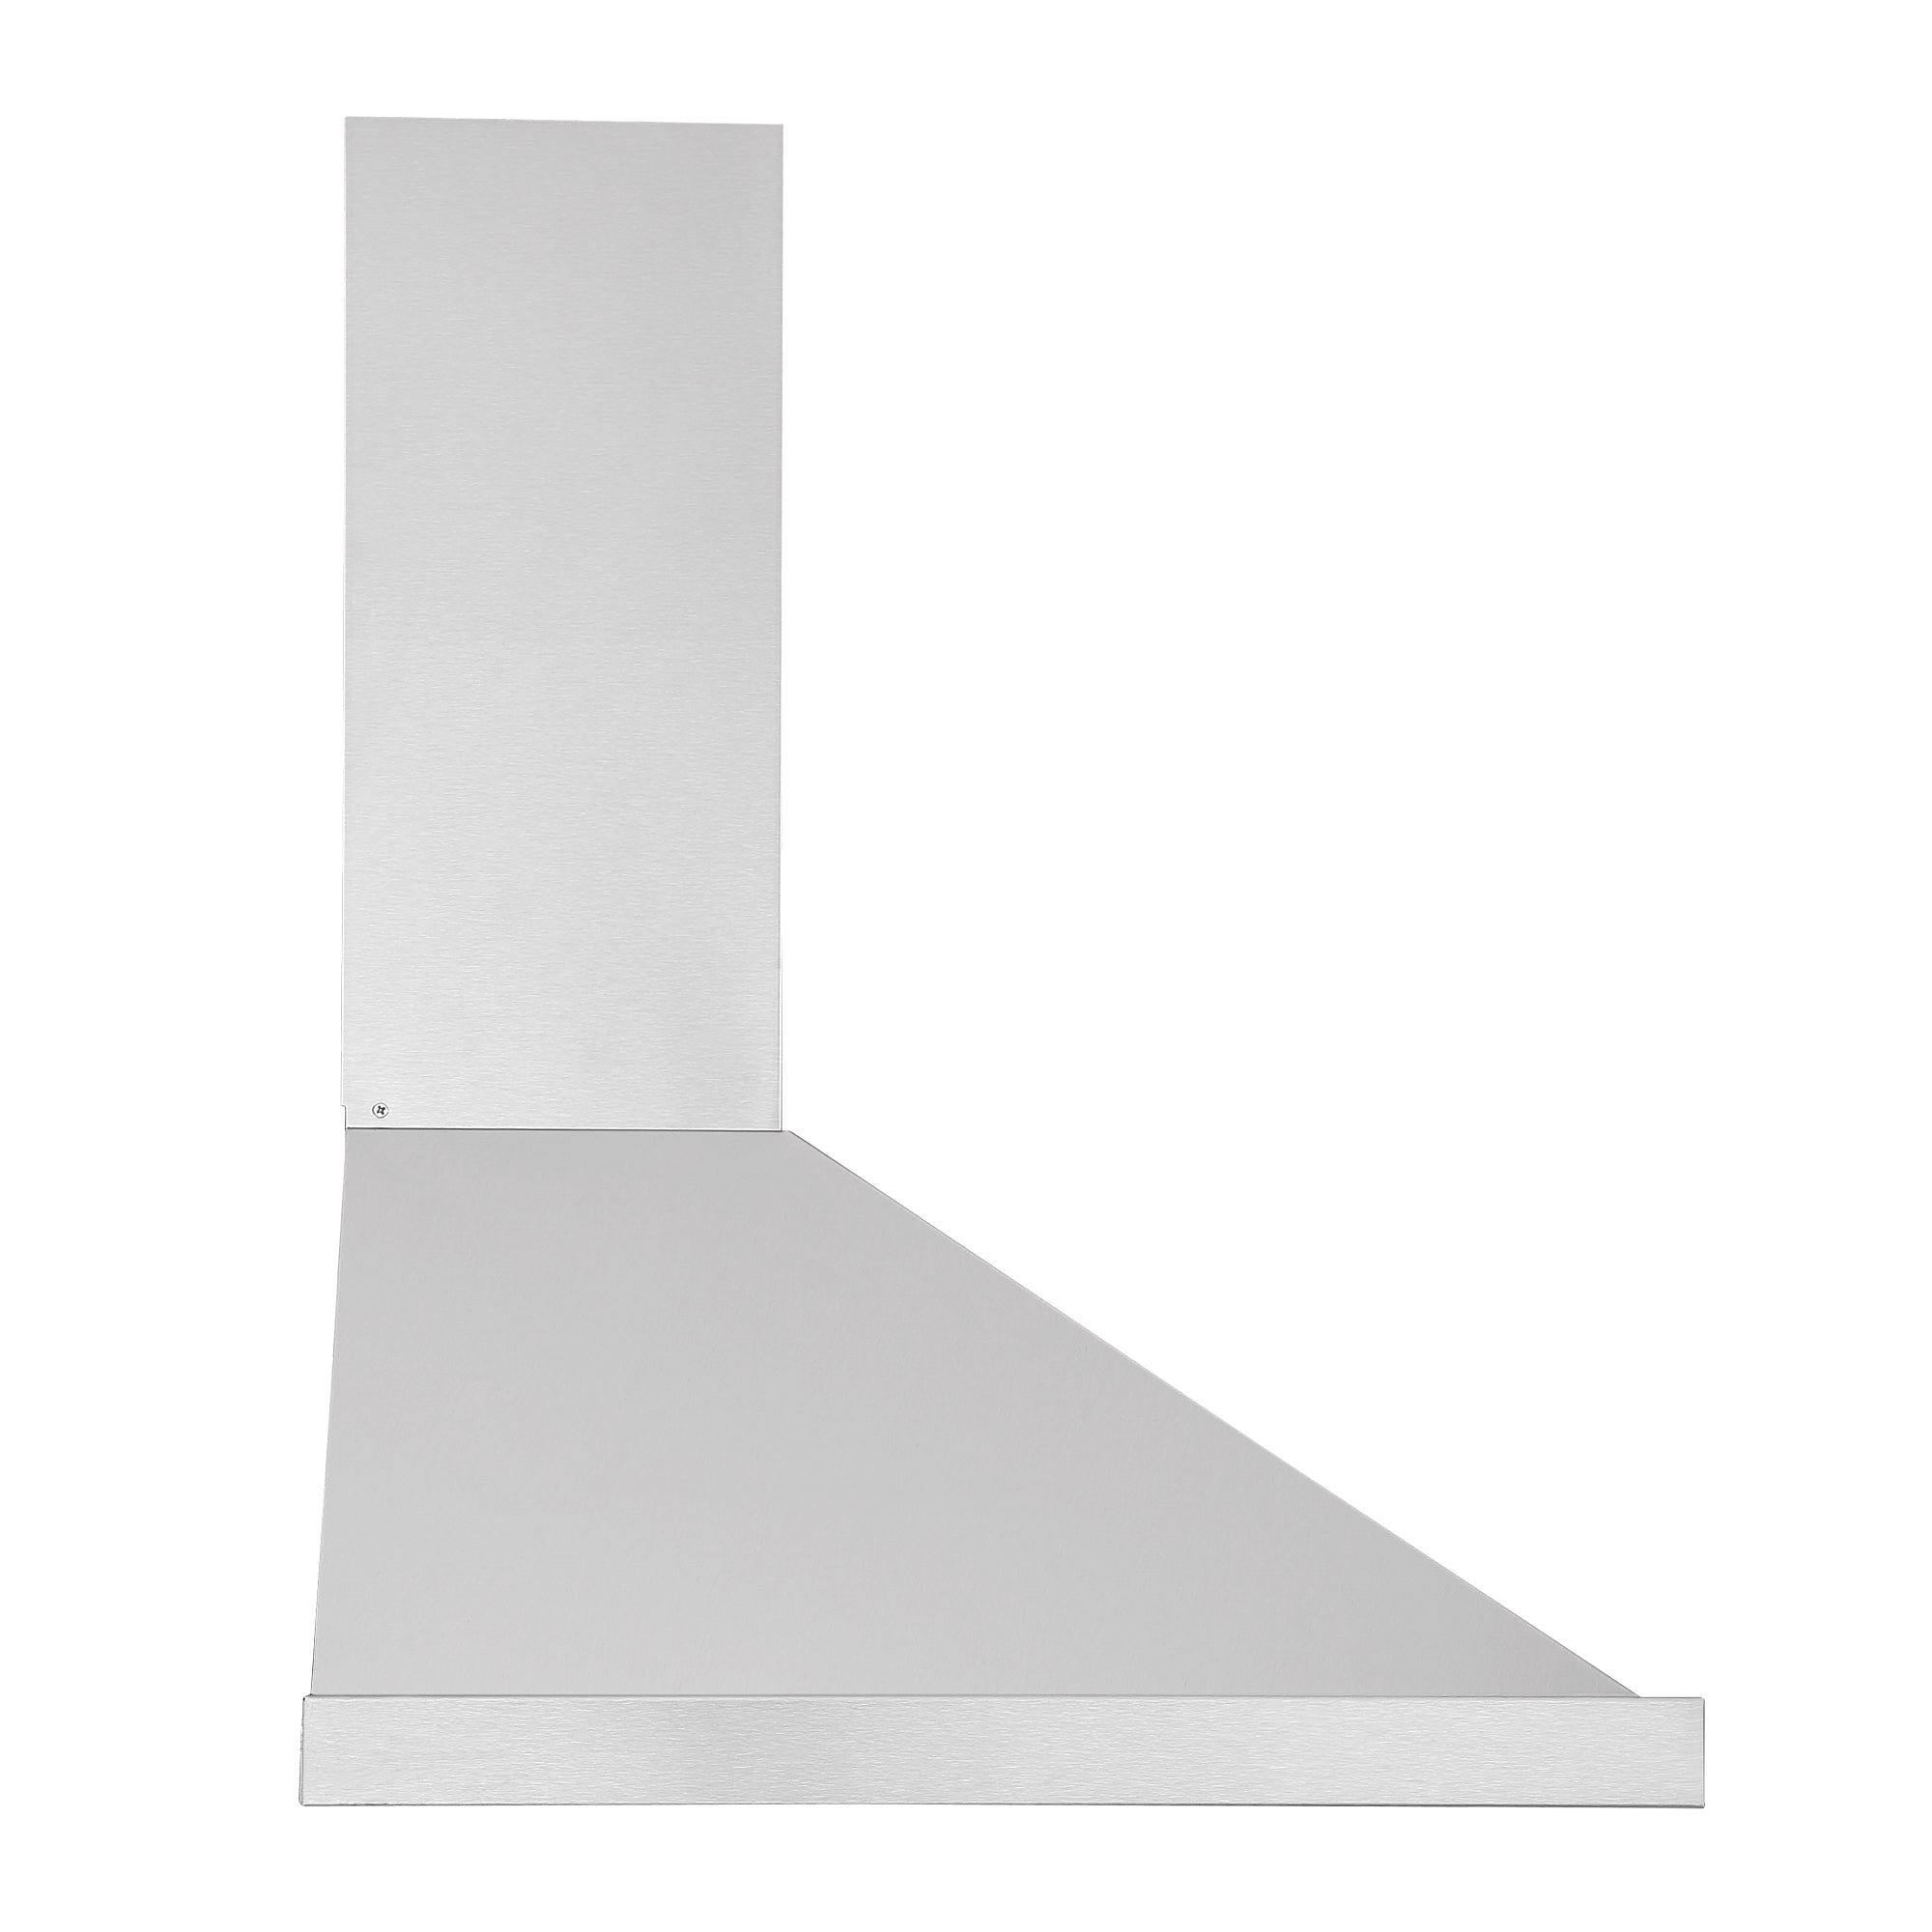 Ancona 24” 280 CFM Convertible Wall Mount Pyramid Range Hood in Stainless Steel